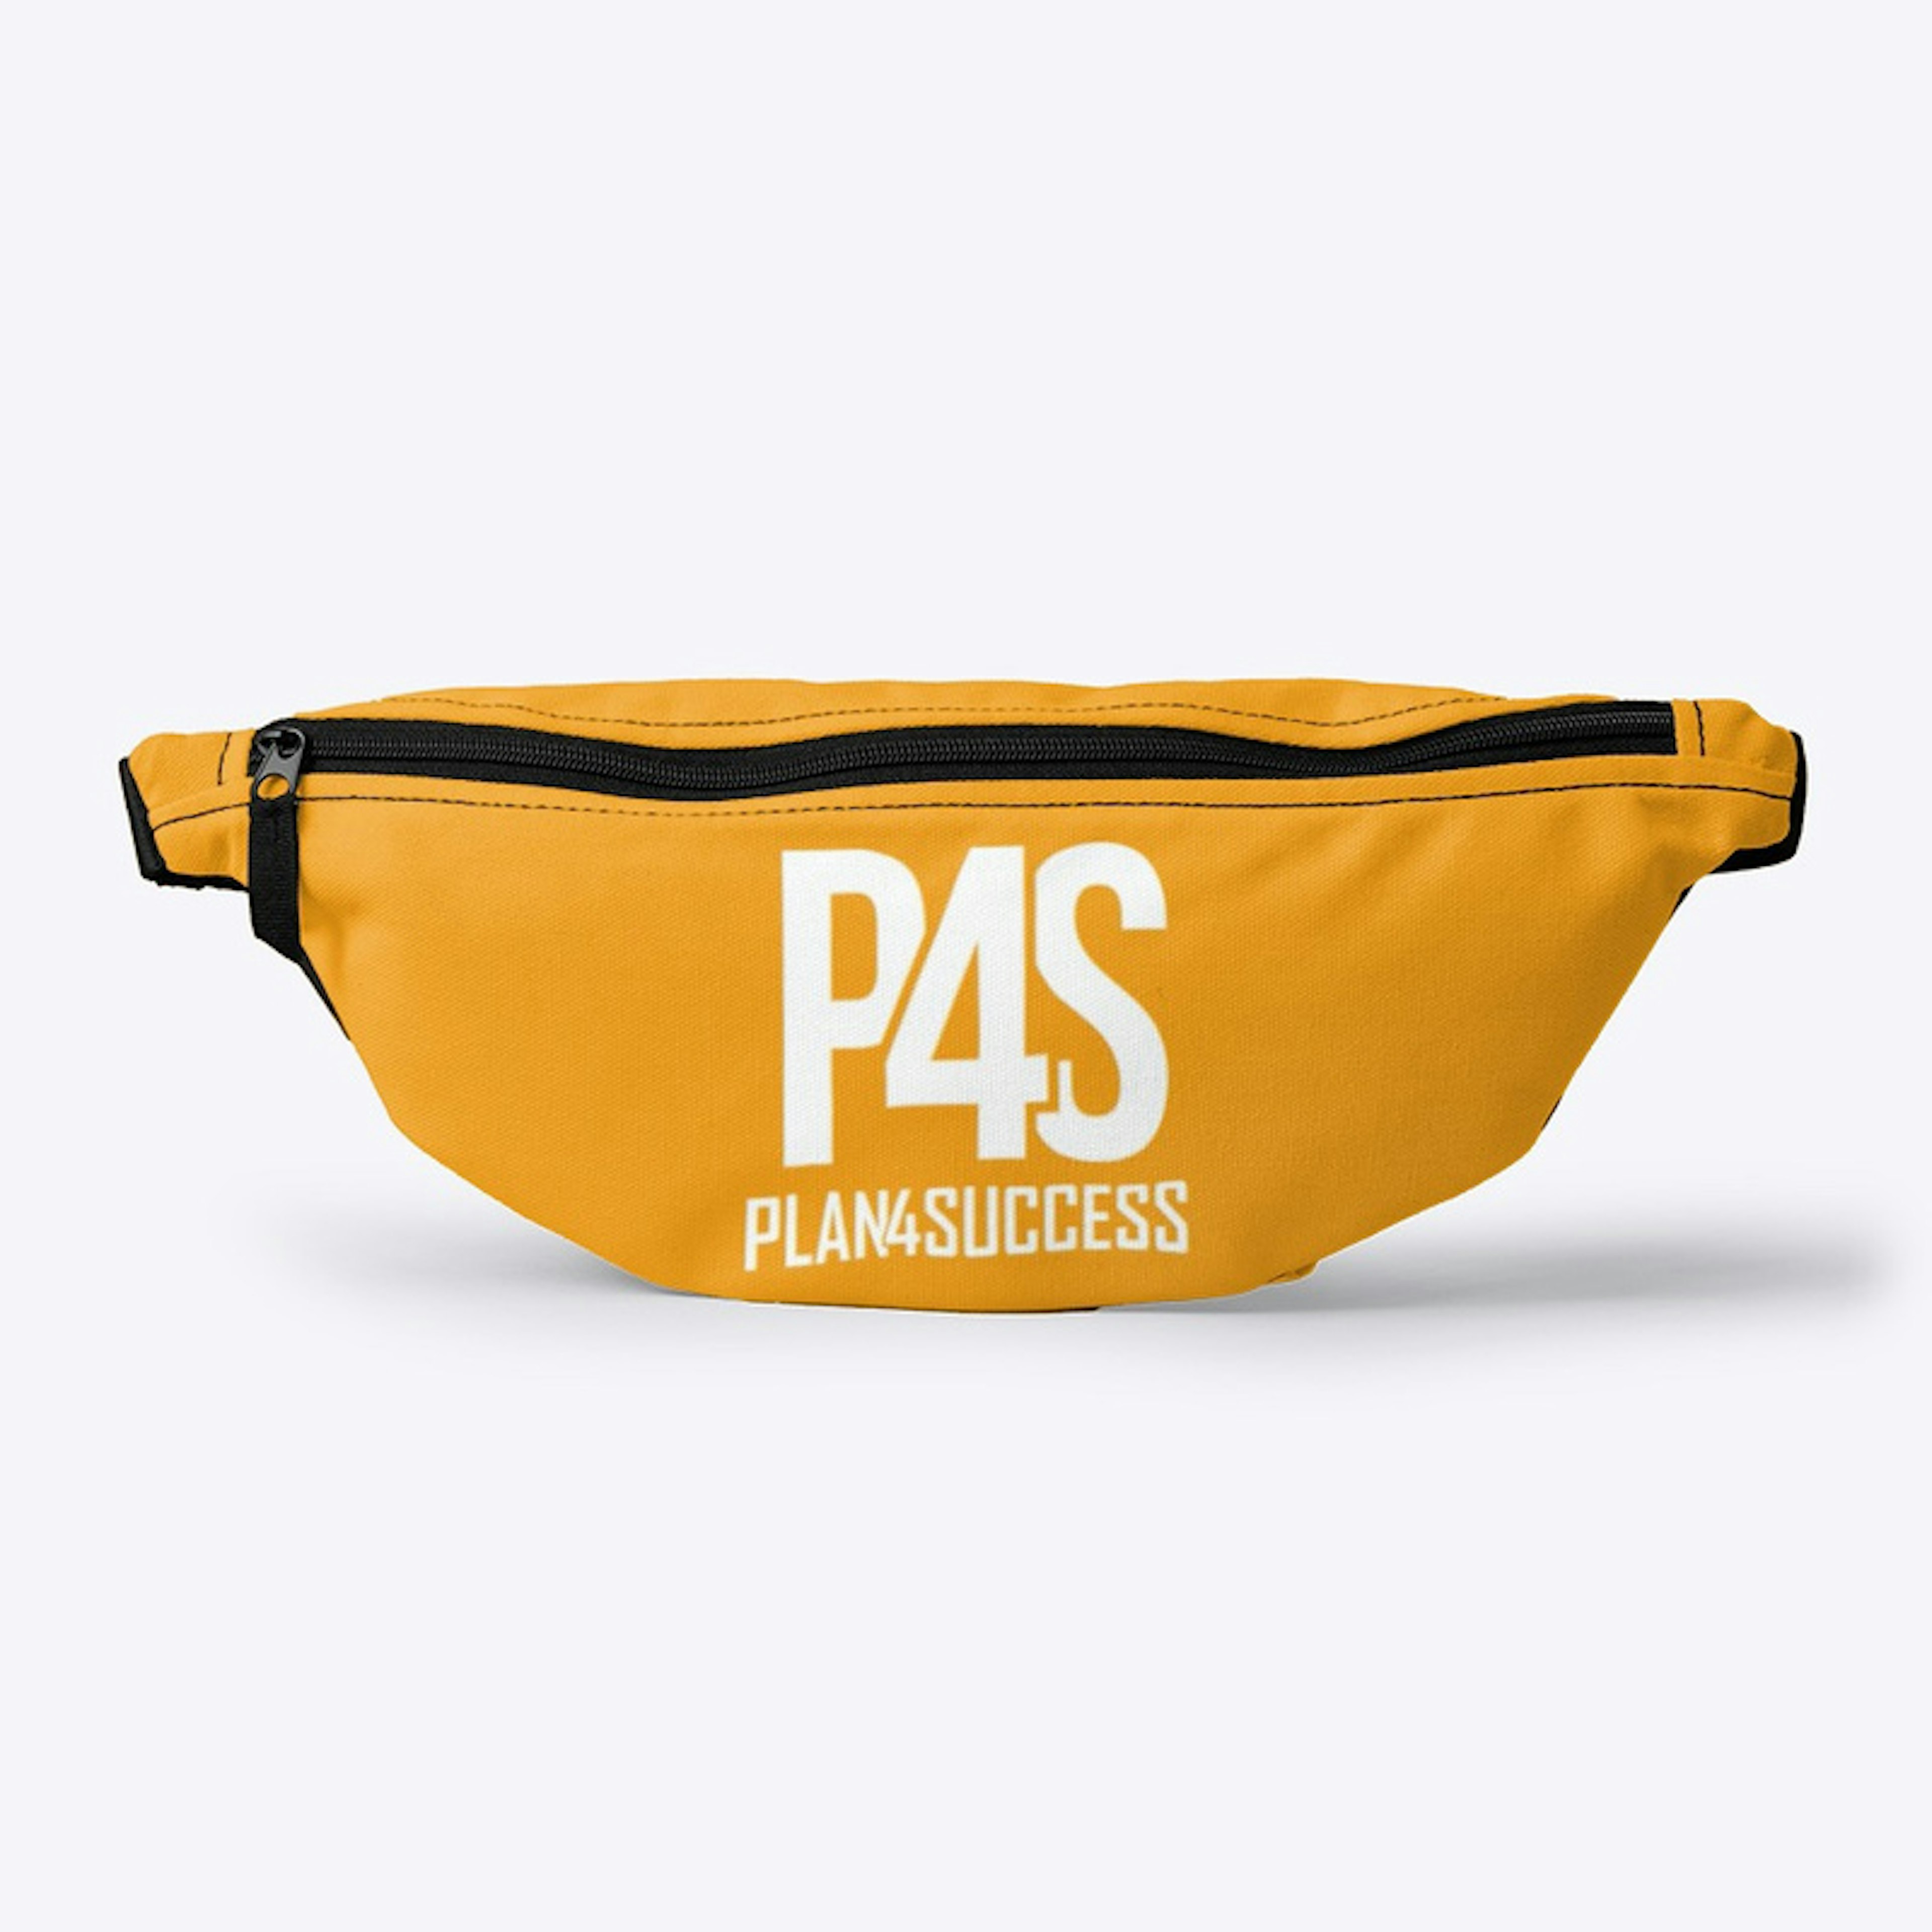 P4S Fanny Pack 3